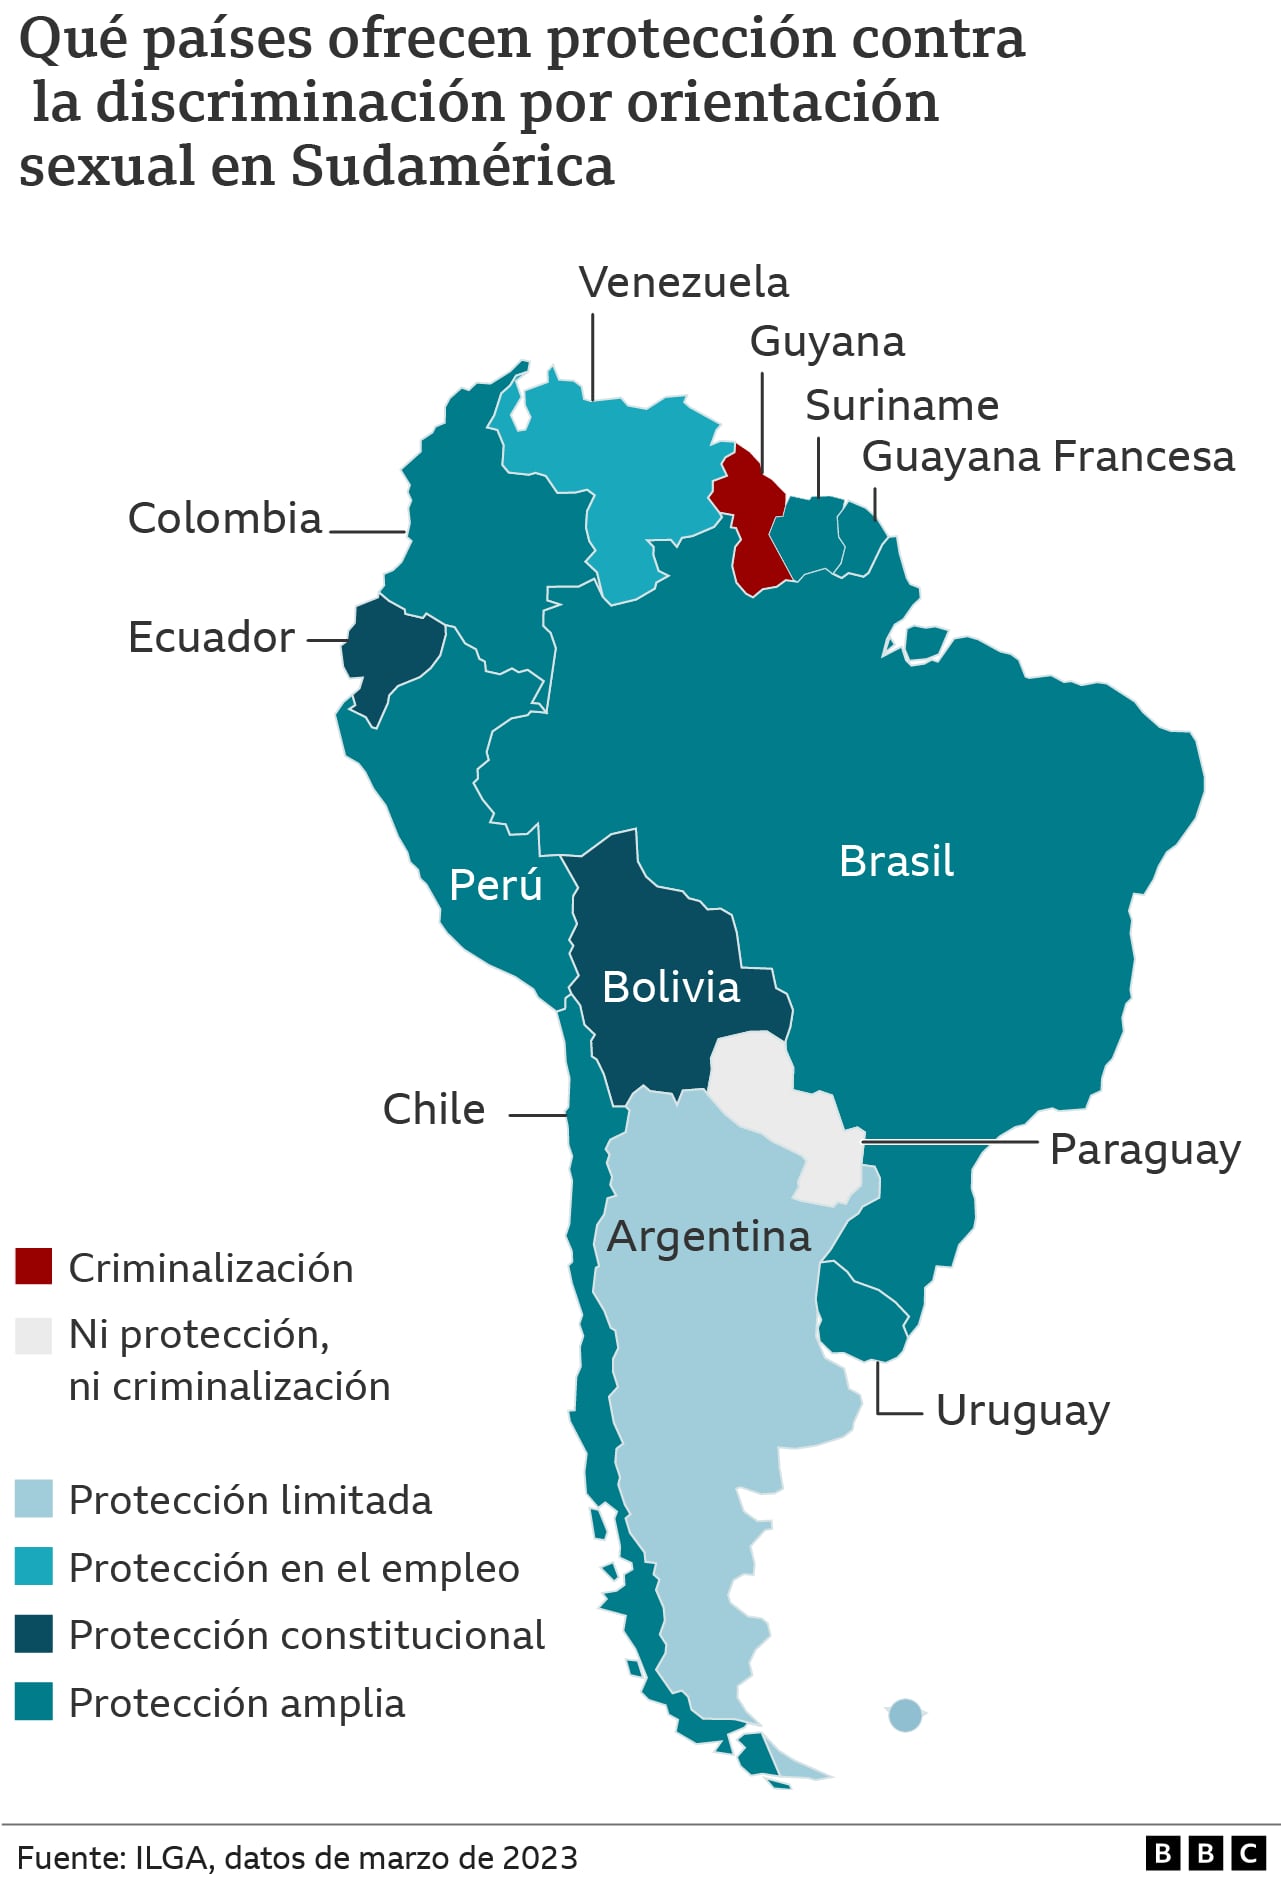 Map of the situation of homosexual people in South America.